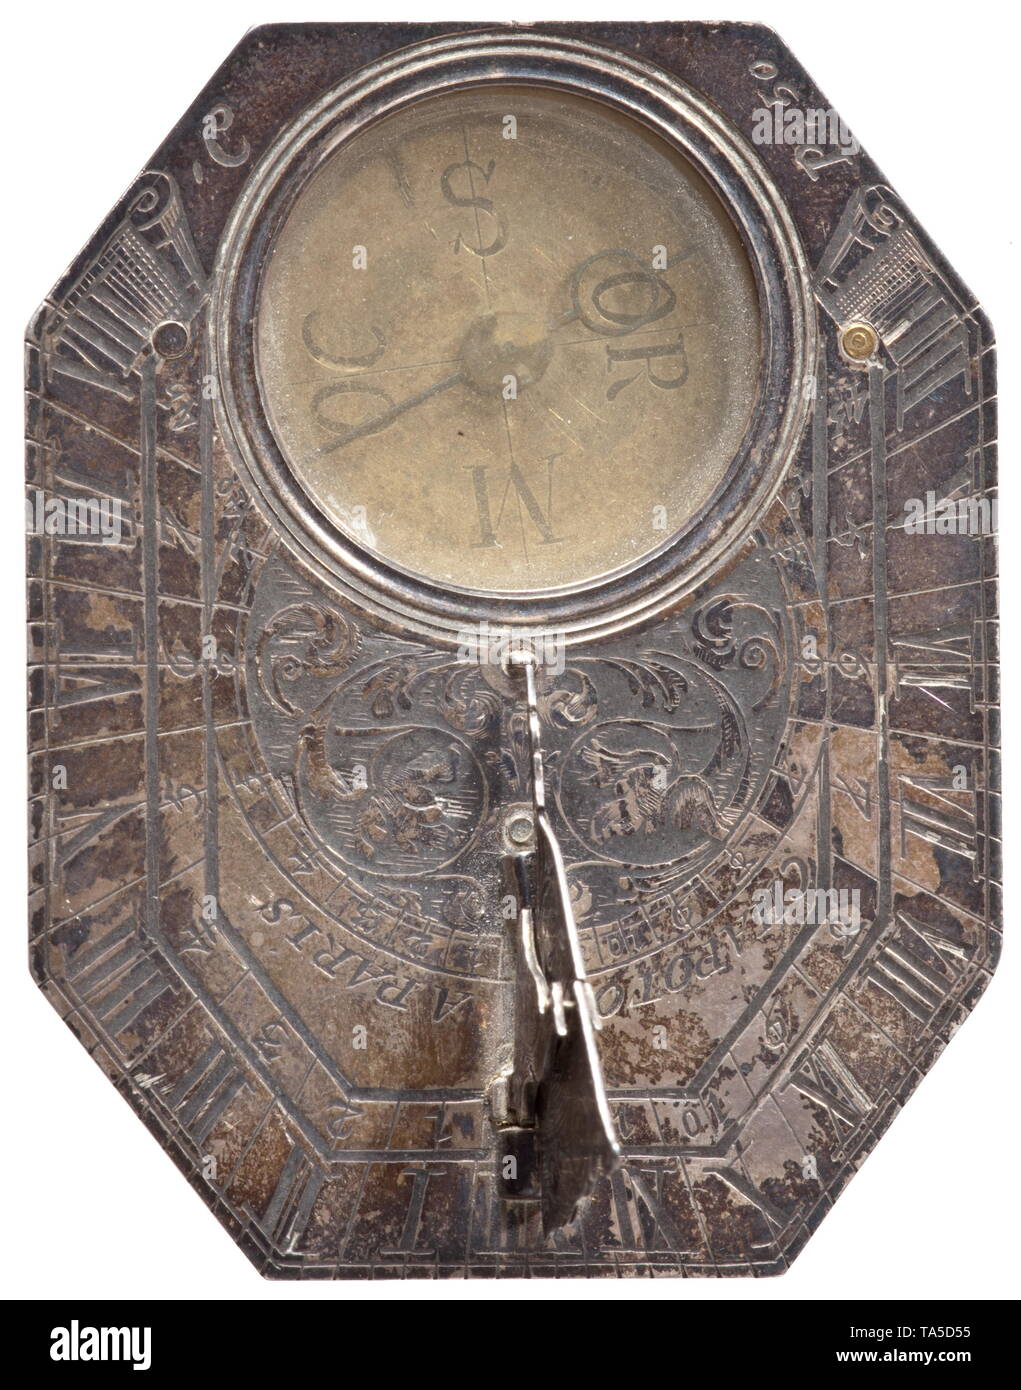 A silver sundial, Paris, 18th century Octagonal plate with finely engraved scale and signature 'Chapotot à  Paris'. Adjustable collapsible hand with base in the shape of a bird, the compass with intact glass lid. On the back a list of European cities with the corresponding settings. Dimensions 57 x 47 cm. historic, historical, handicrafts, handcraft, craft, object, objects, stills, clipping, clippings, cut out, cut-out, cut-outs, 18th century, Additional-Rights-Clearance-Info-Not-Available Stock Photo